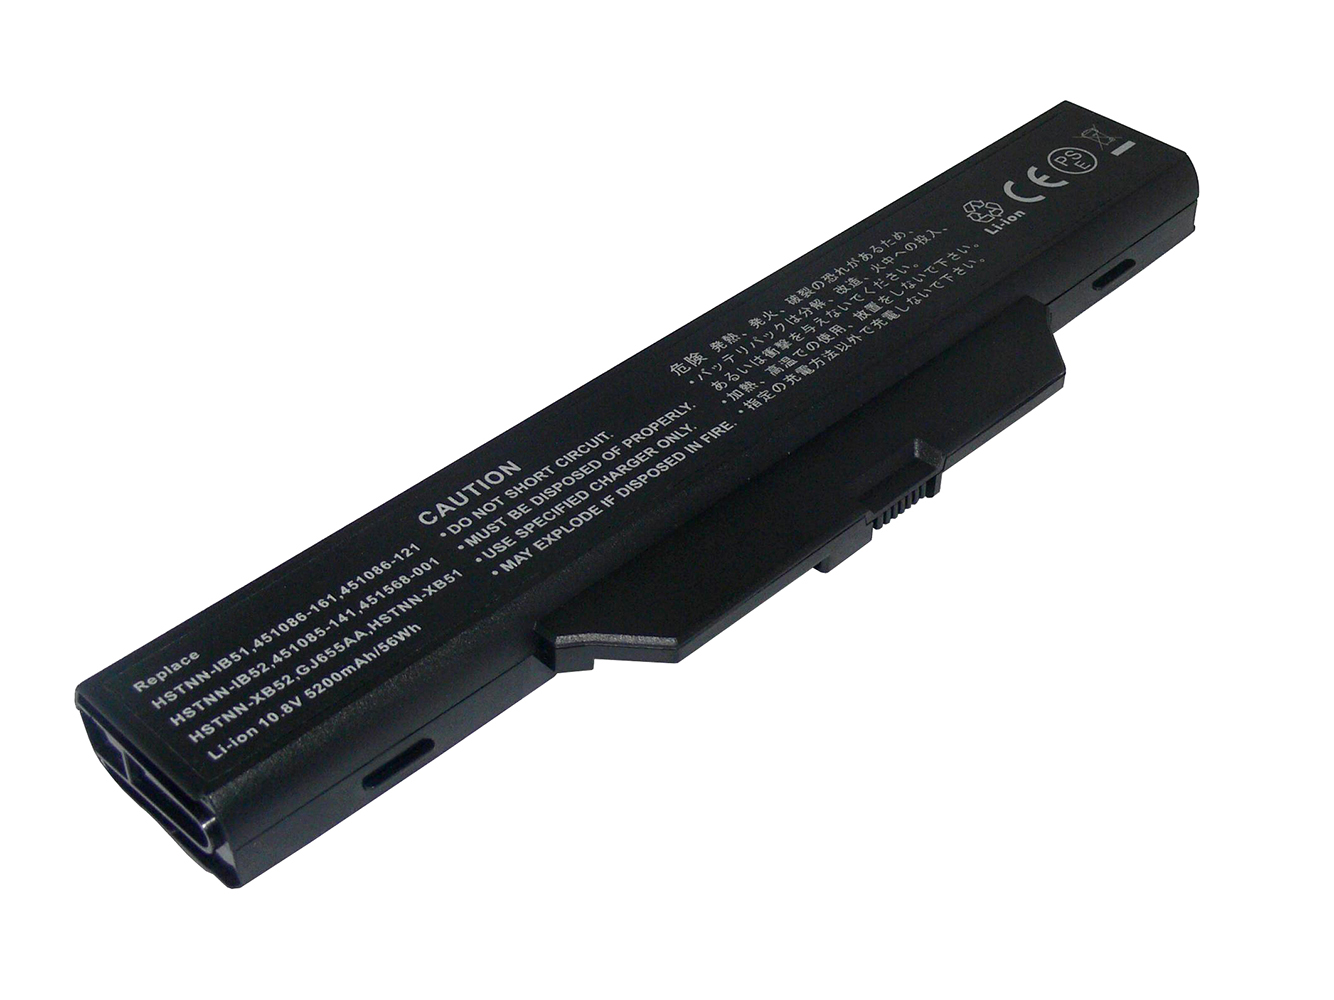 Replacement for HP COMPAQ Business Notebook 6730s, Business Notebook 6730s/CT, Business Notebook 6735s, Business Notebook 6830s Laptop Battery